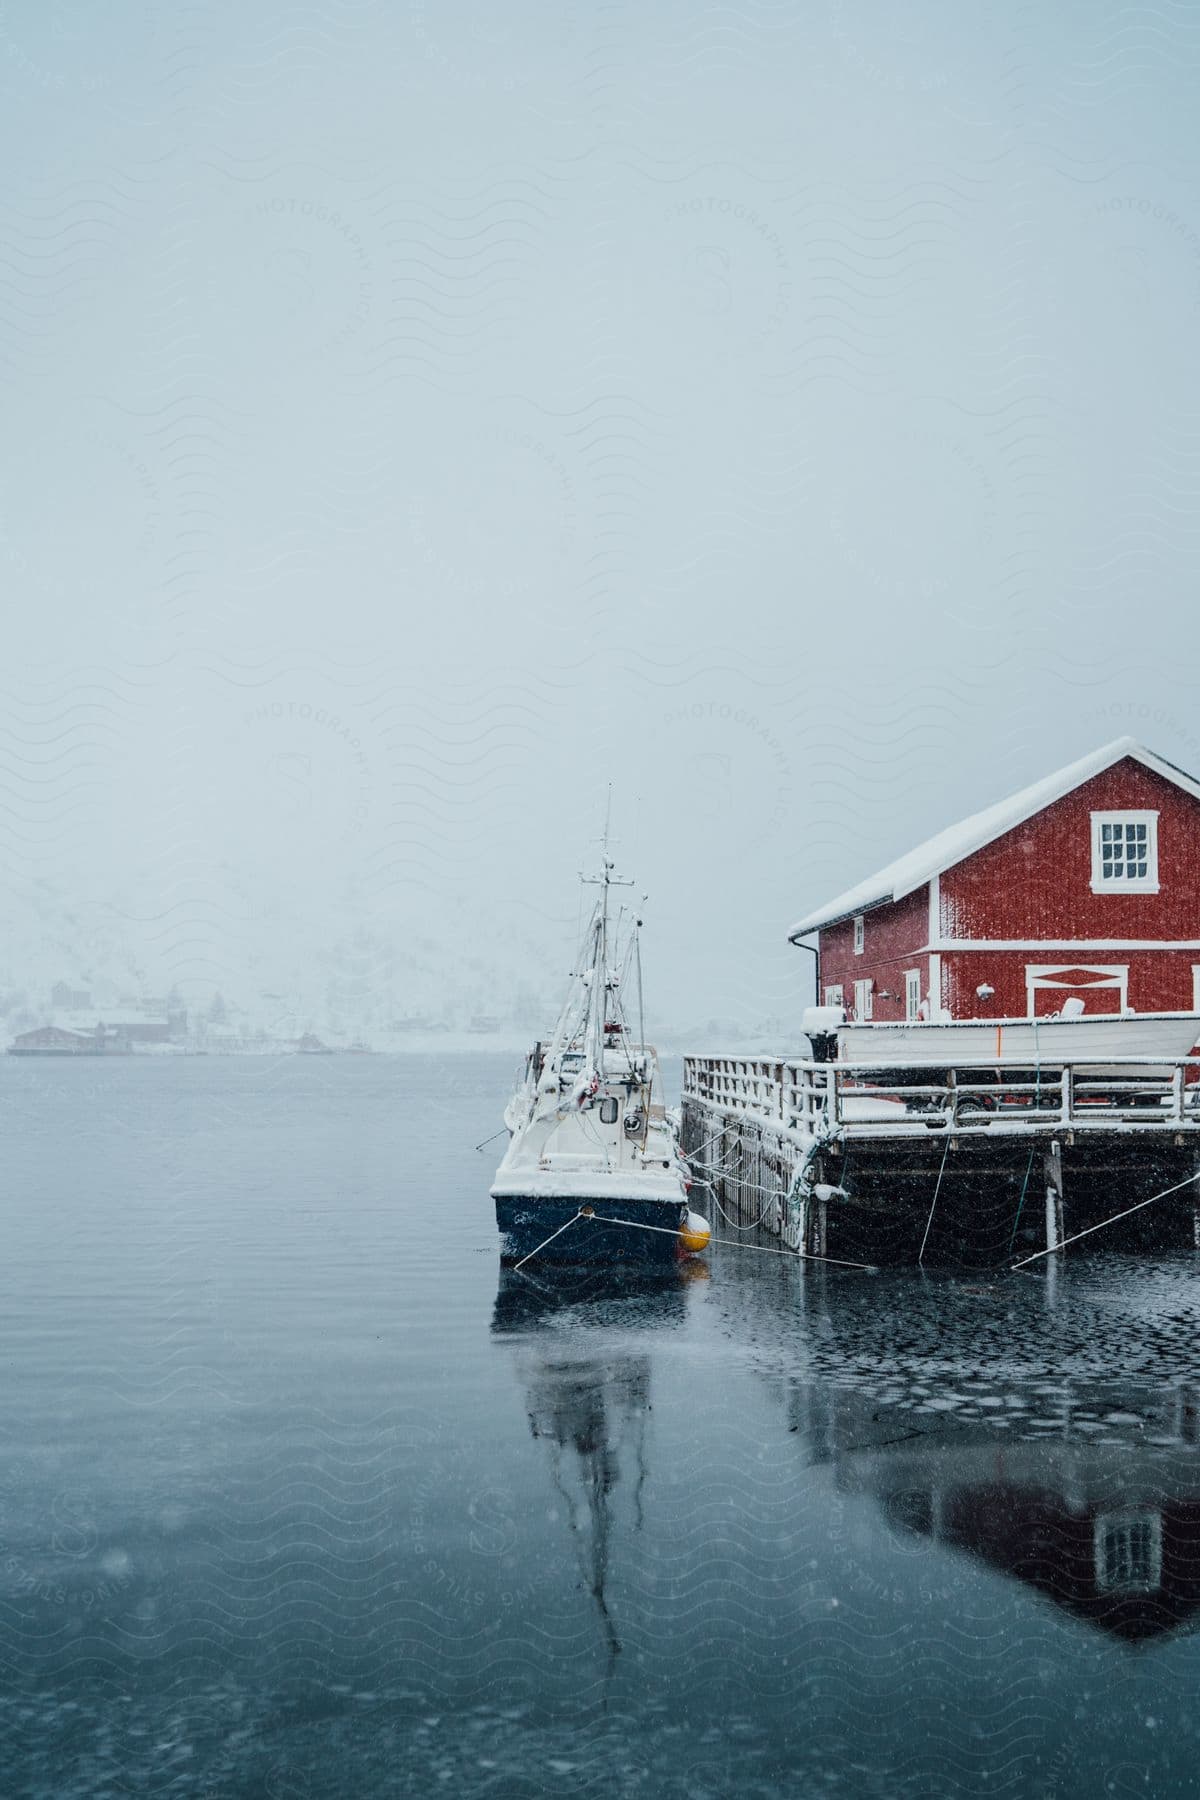 Boat moored to a pier next to a red cabin in the arctic sea